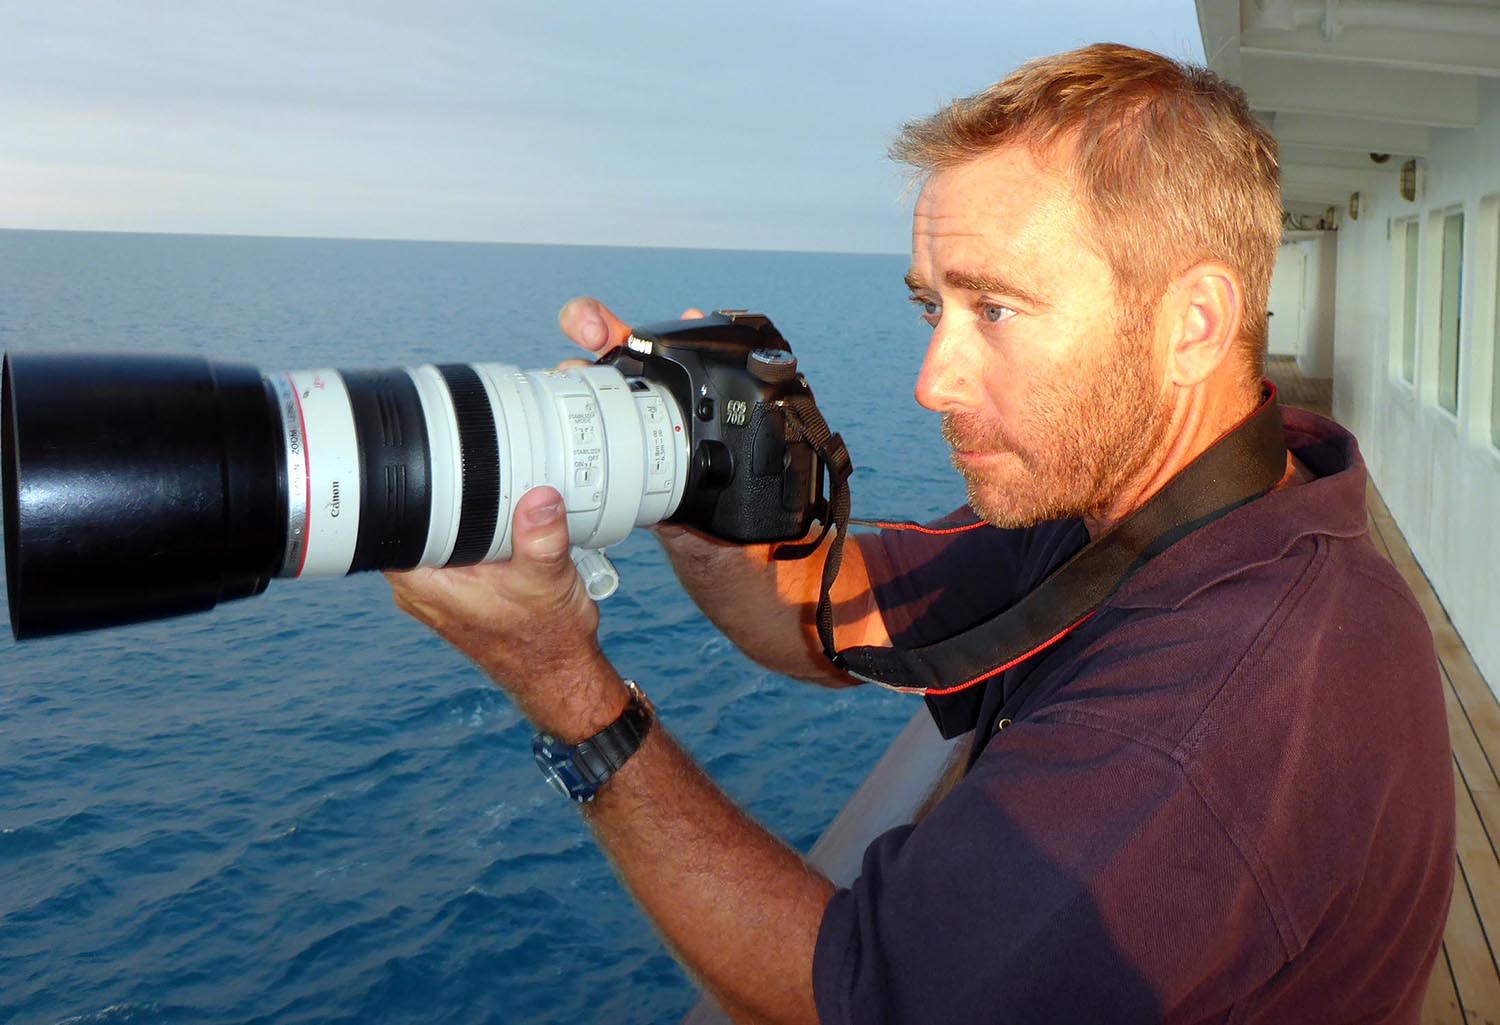 Damon Ramsey portrait on a ship, with a camera